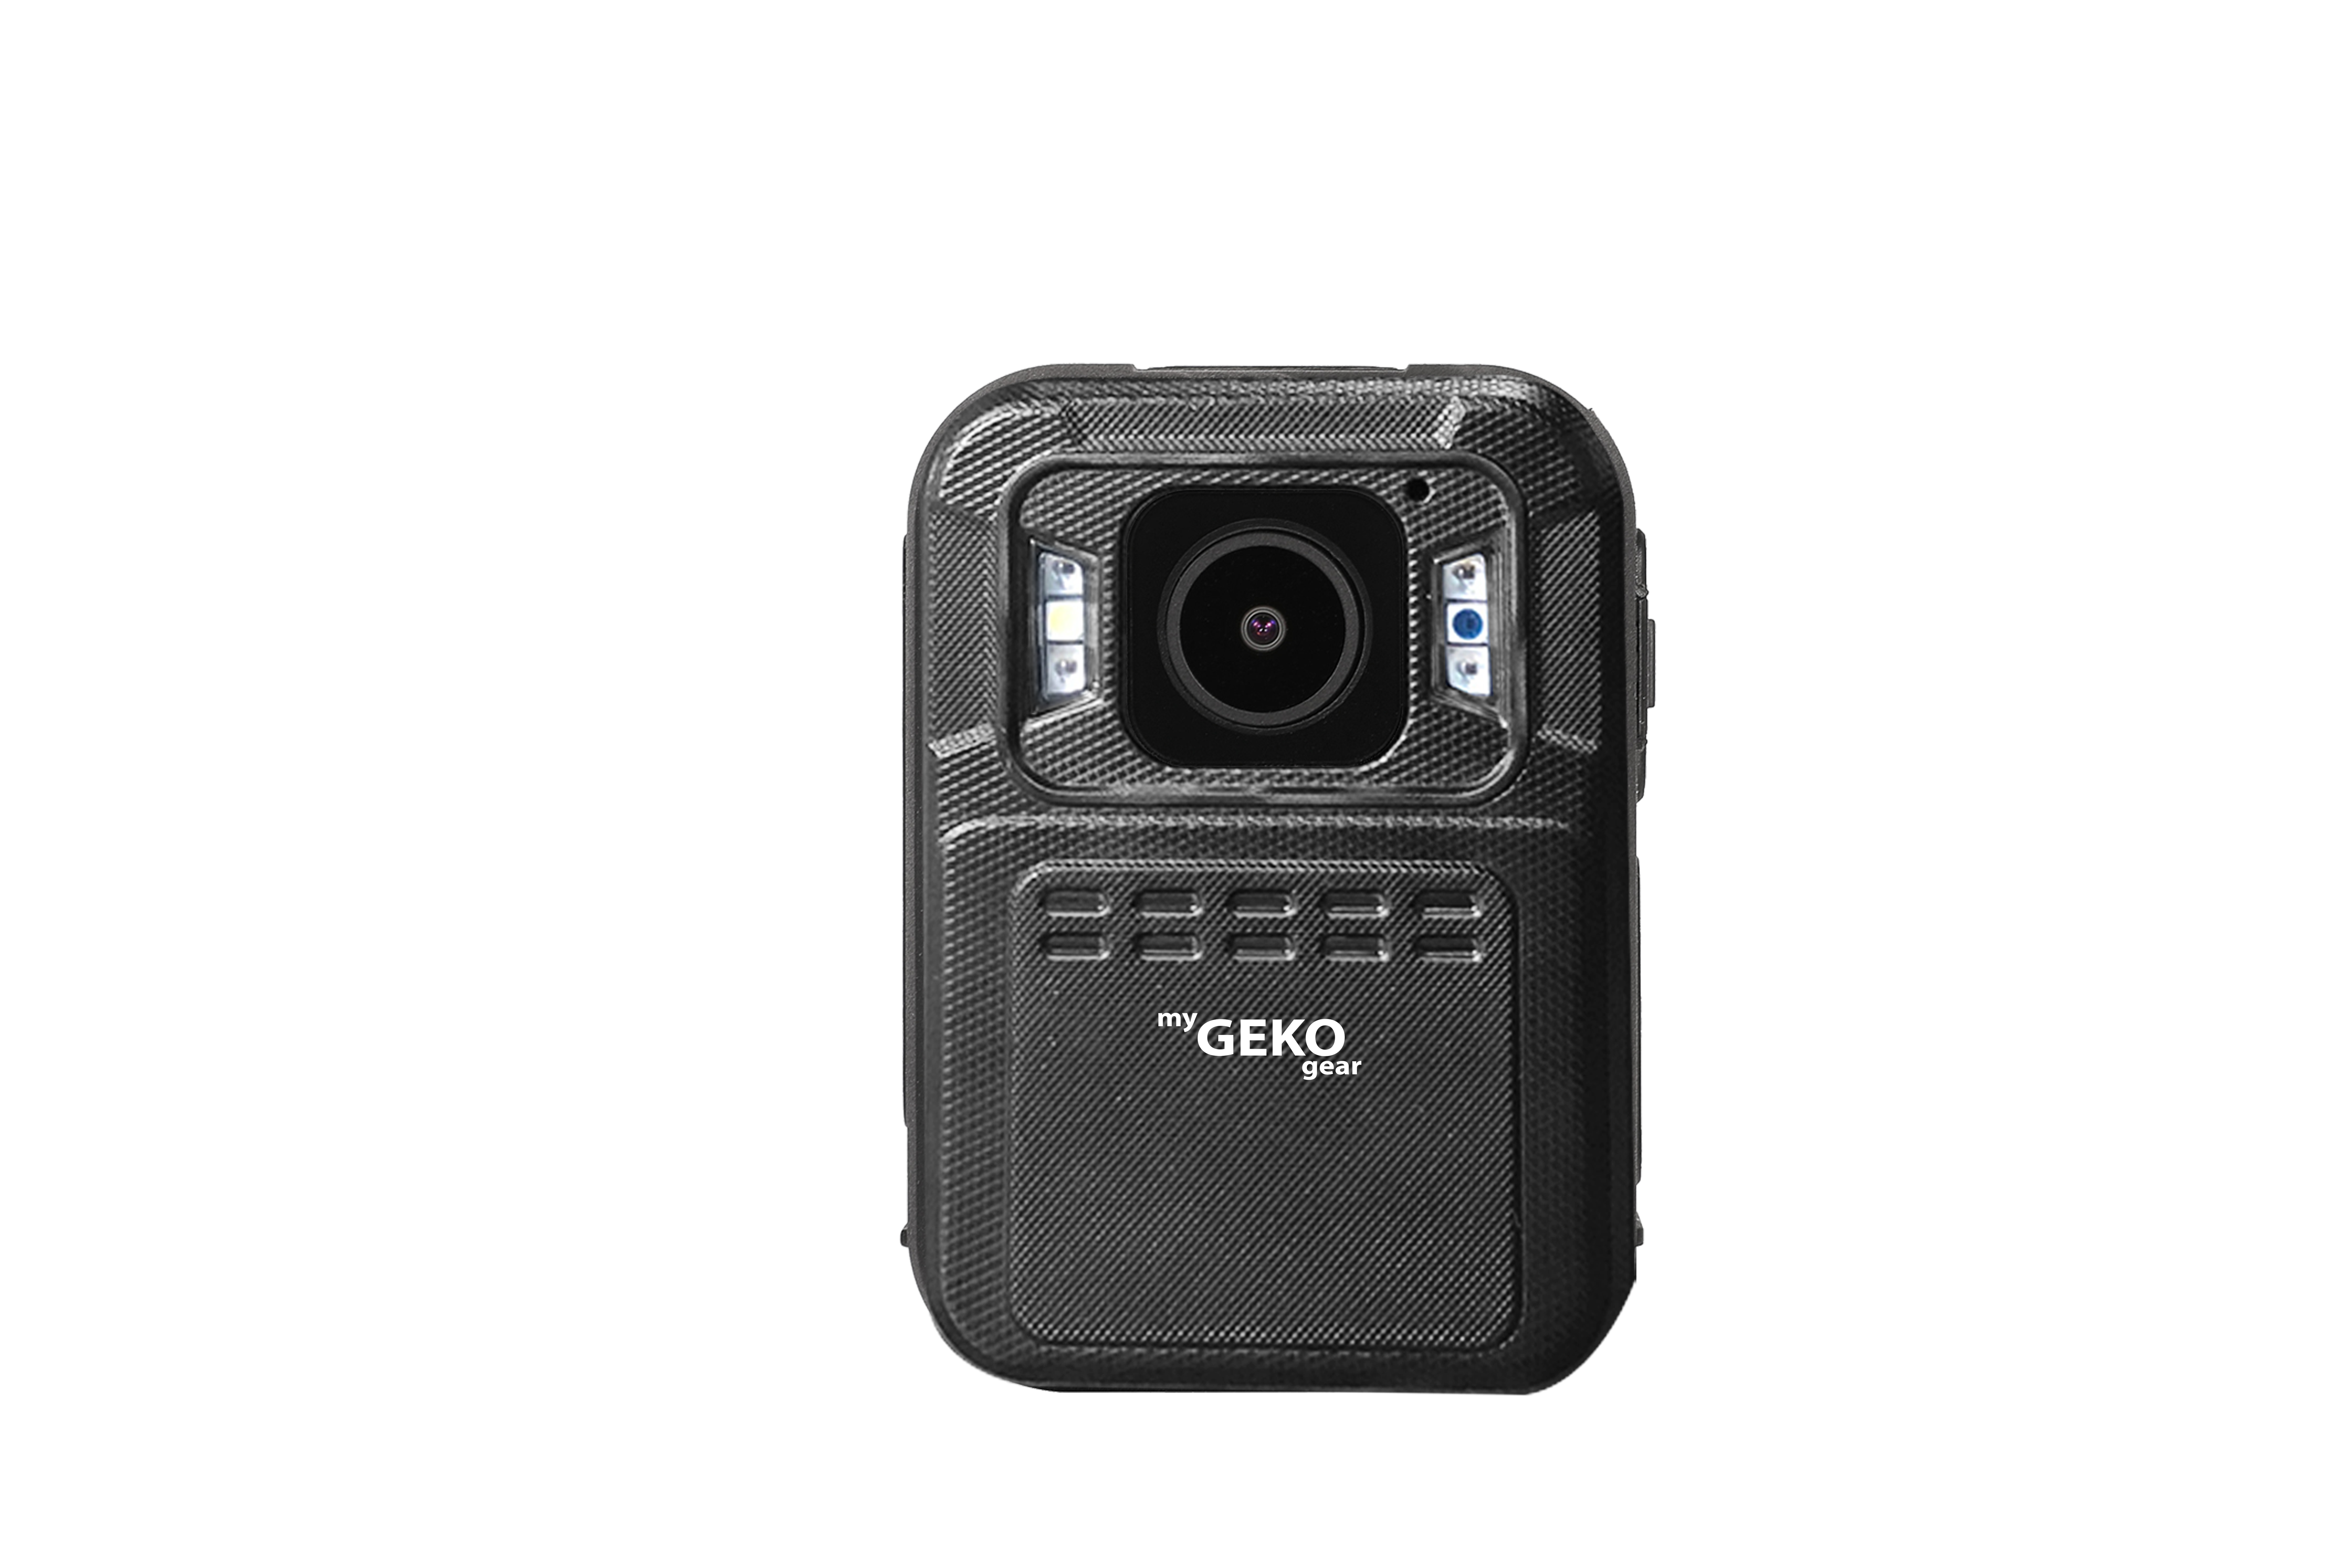 Aegis 200 Front view of the body cam